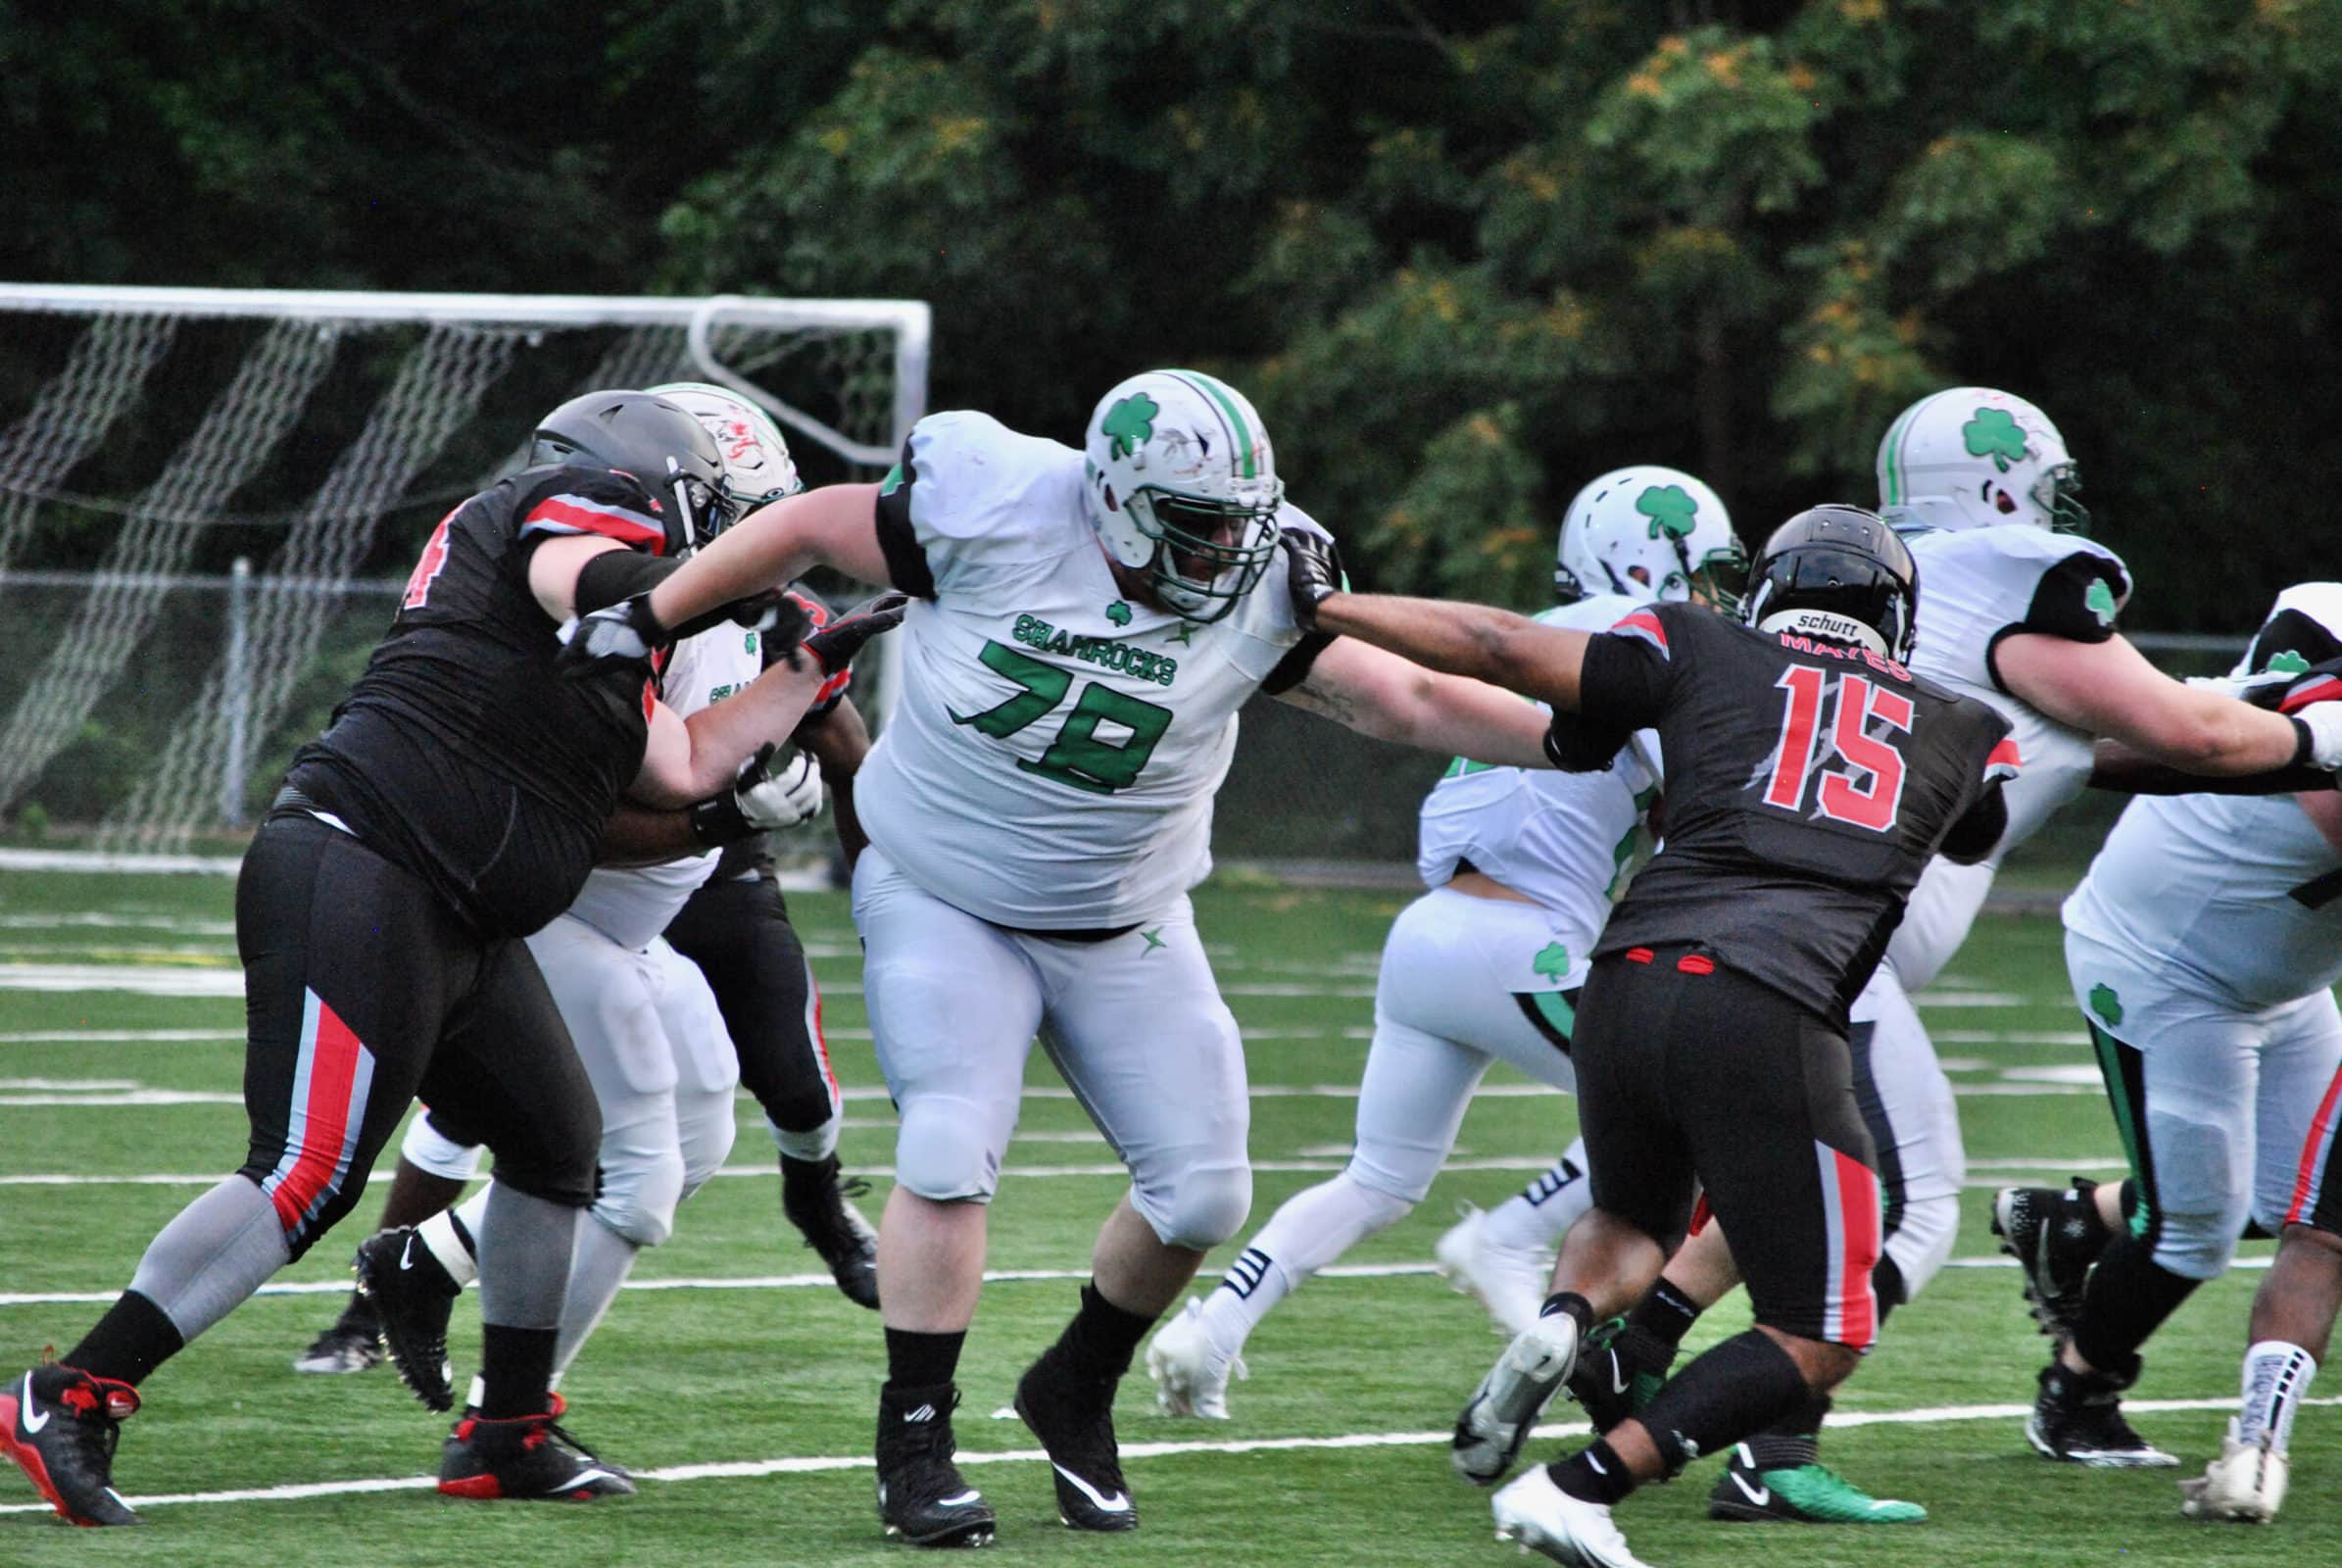 Offensive lineman Michael Hurst stretches to hold back a Connecticut opponent.